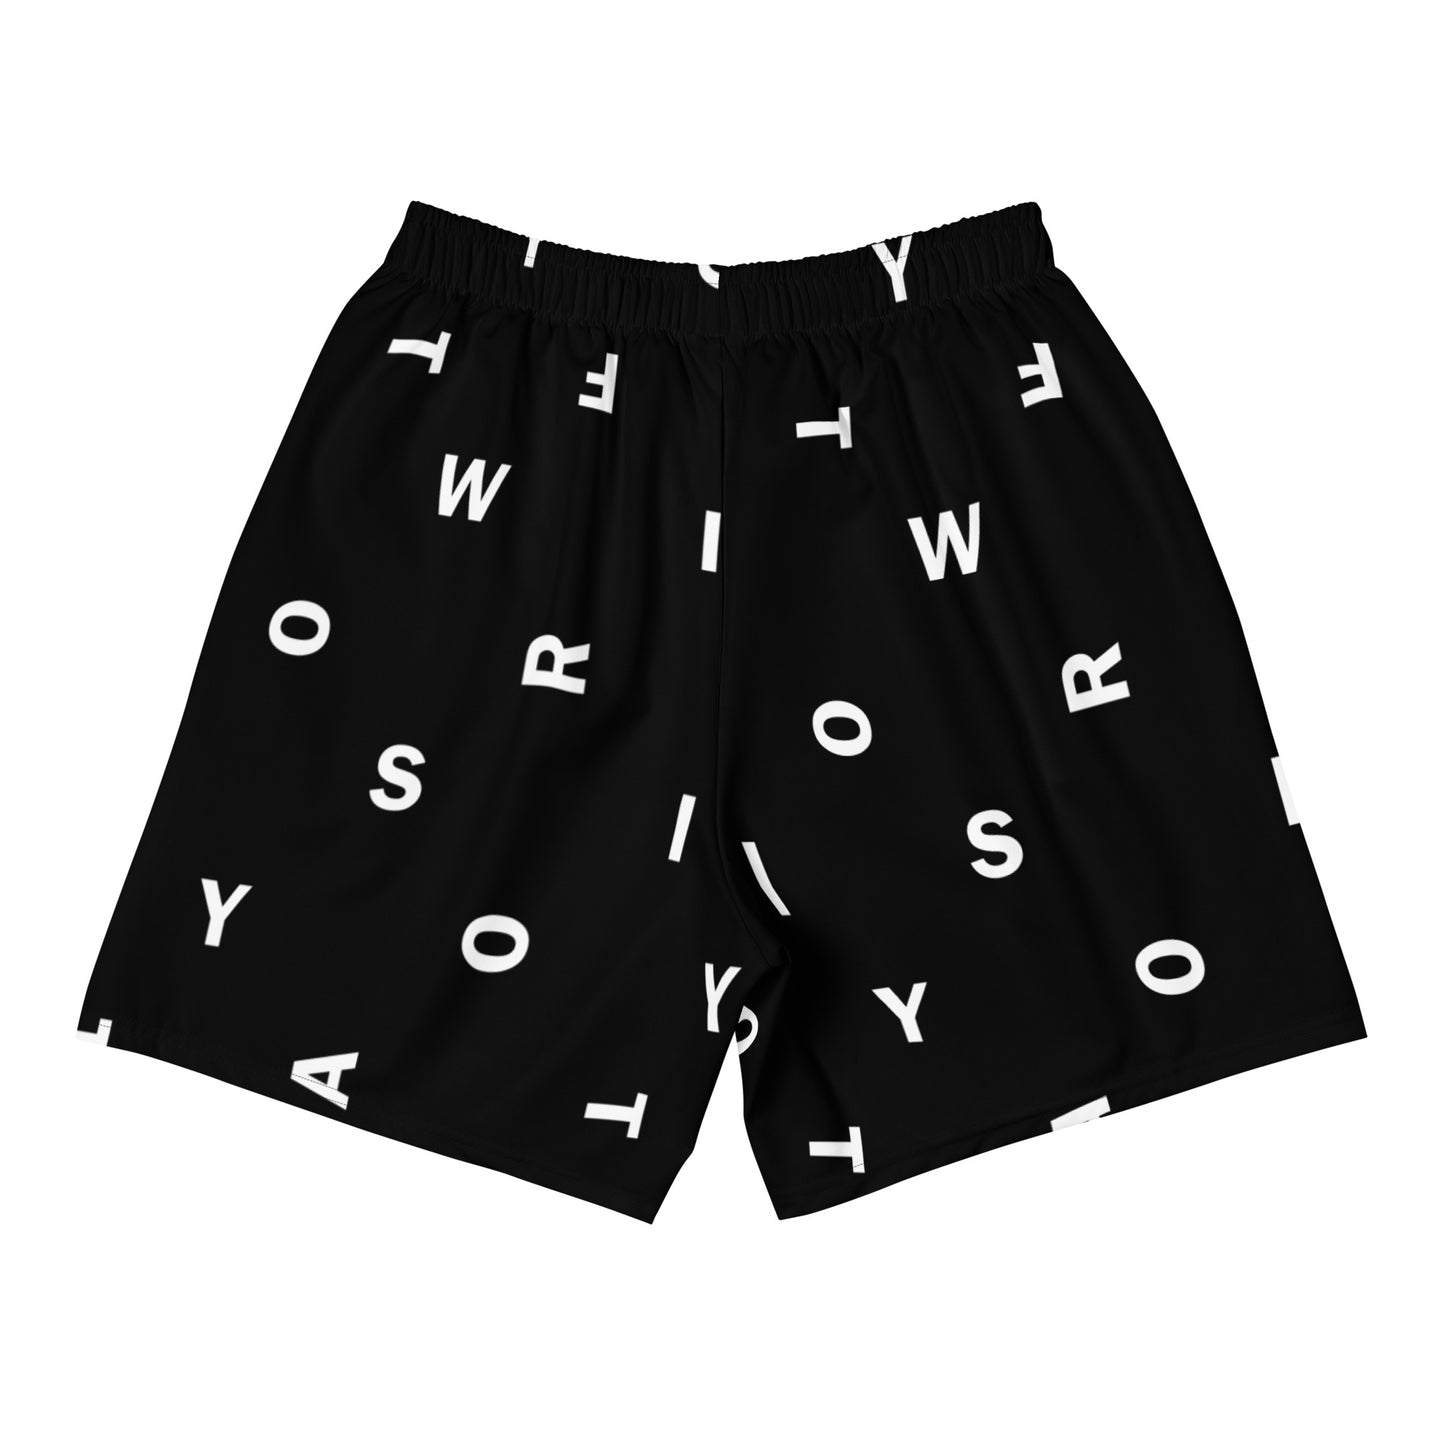 Letter Black - Inspired By Taylor Swift - Sustainably Made Men's Shorts